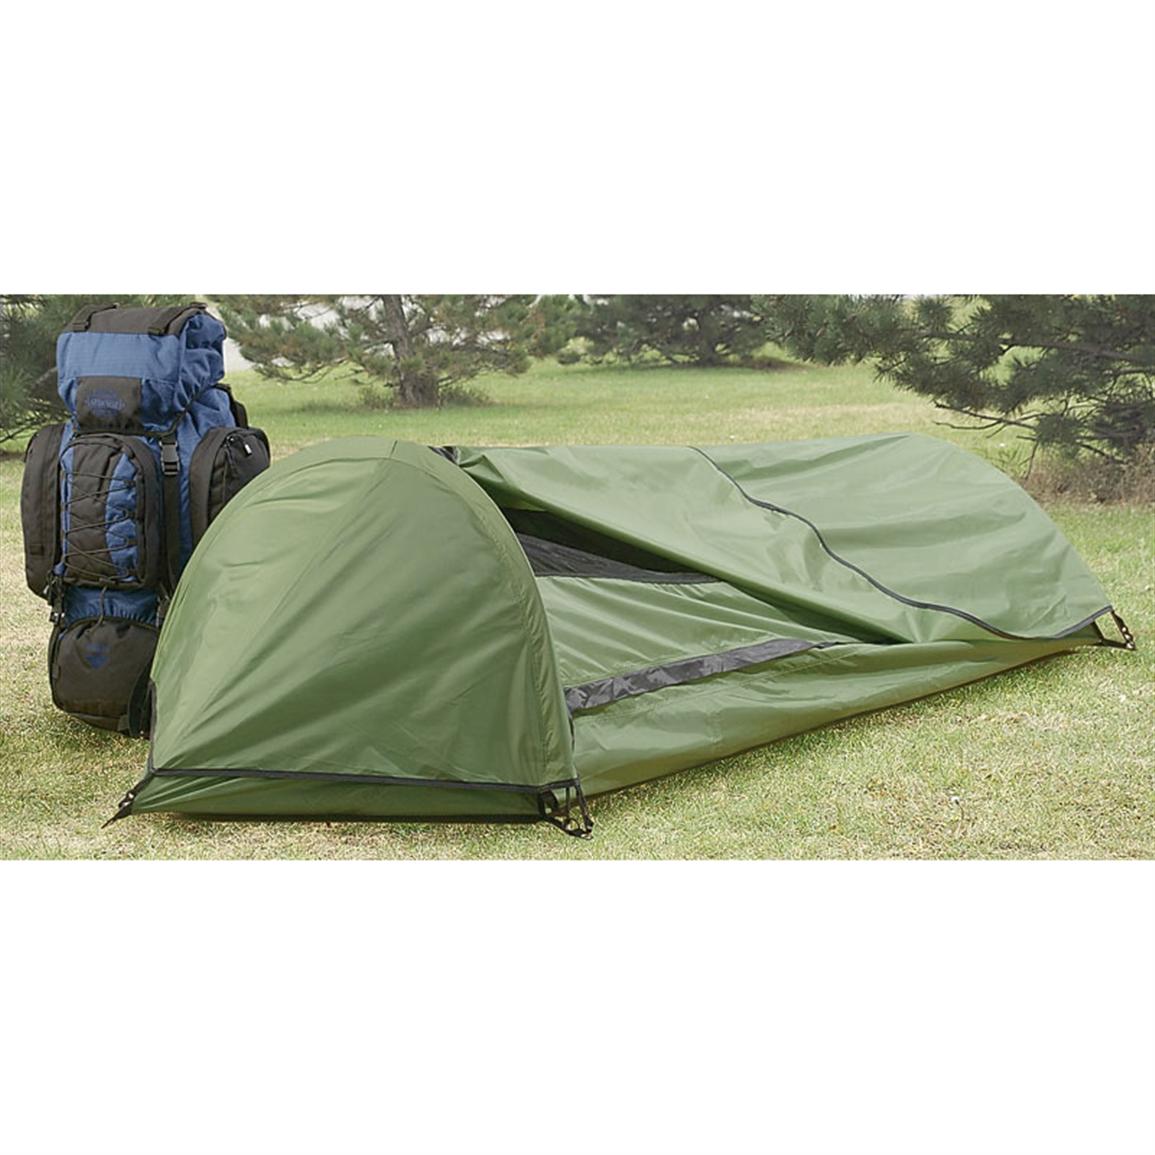 Guide Gear Solo Bivy Tent Backpacking Tents At 8556 Hot Sex Picture 